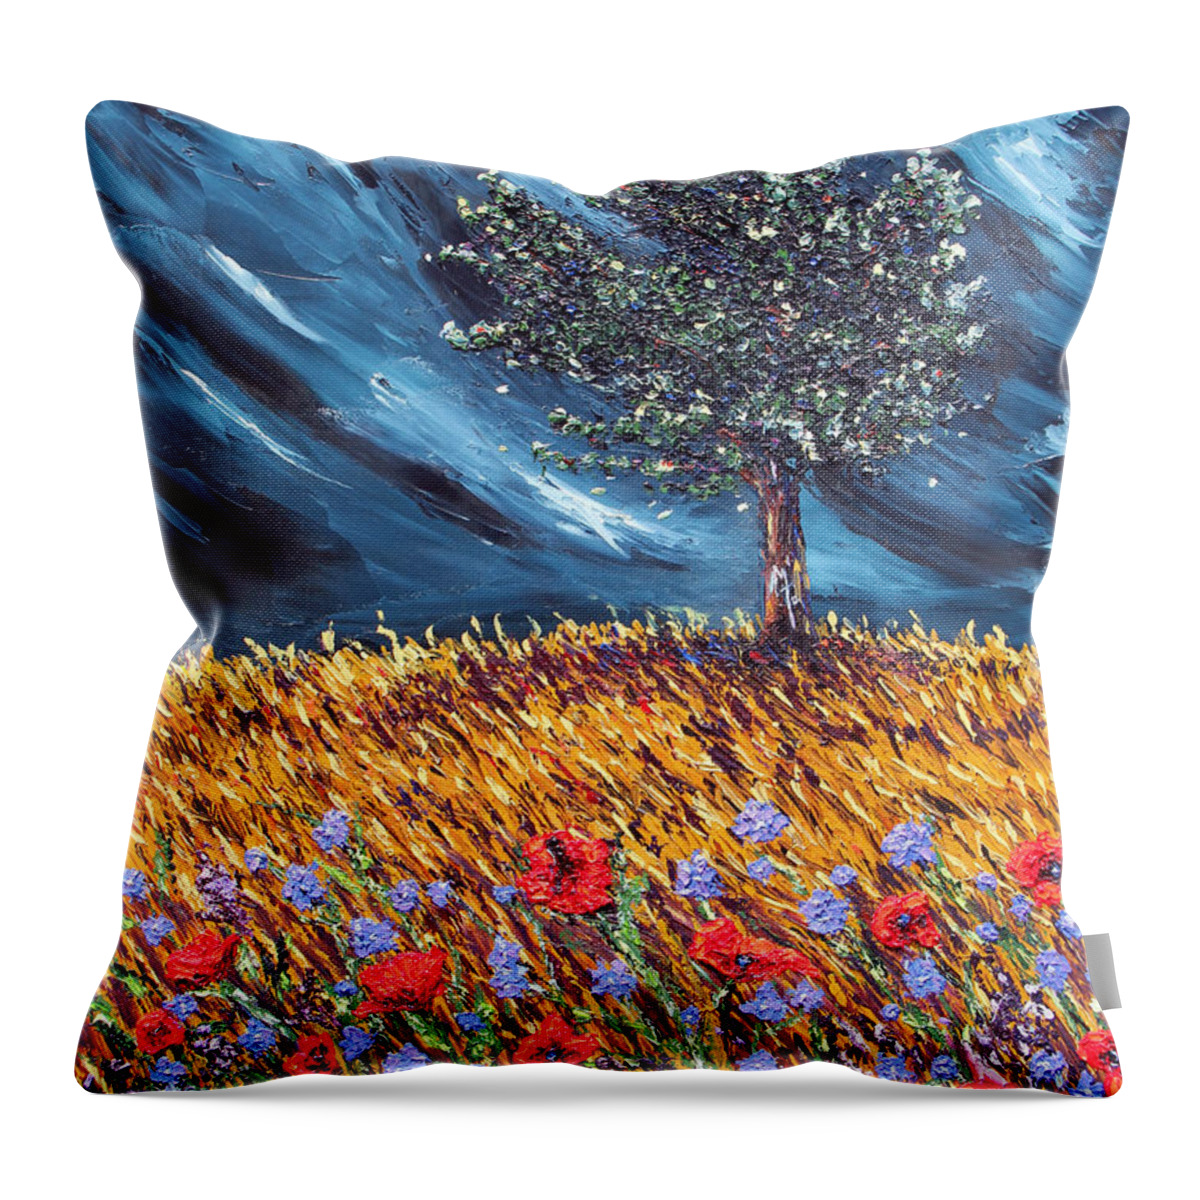 Landscape Throw Pillow featuring the painting Steadfast Love by Meaghan Troup